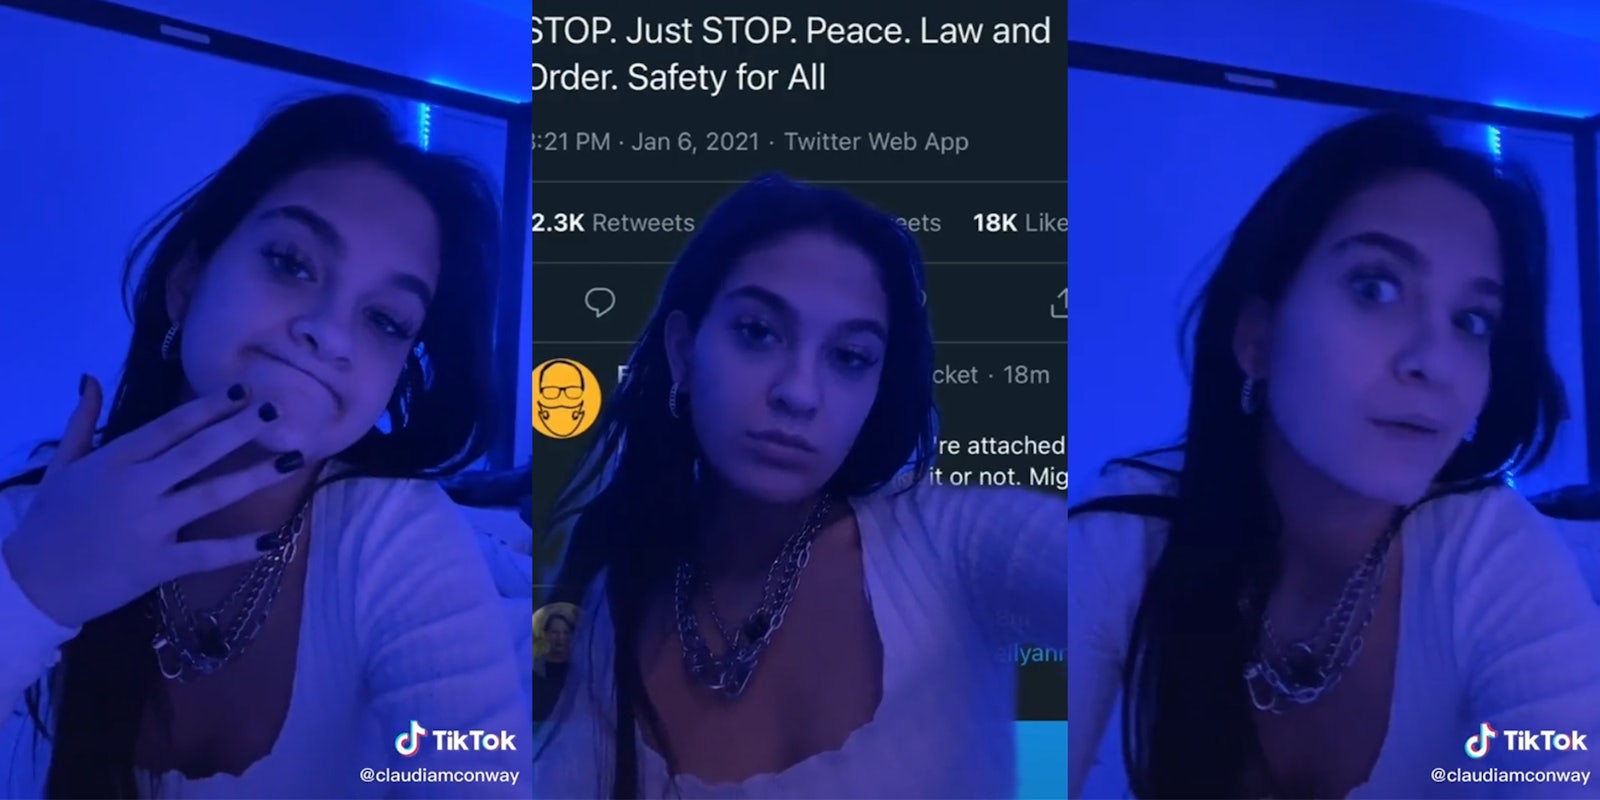 Claudia Conway talking to her mother about the Trump-incited lawlessness via TikTok